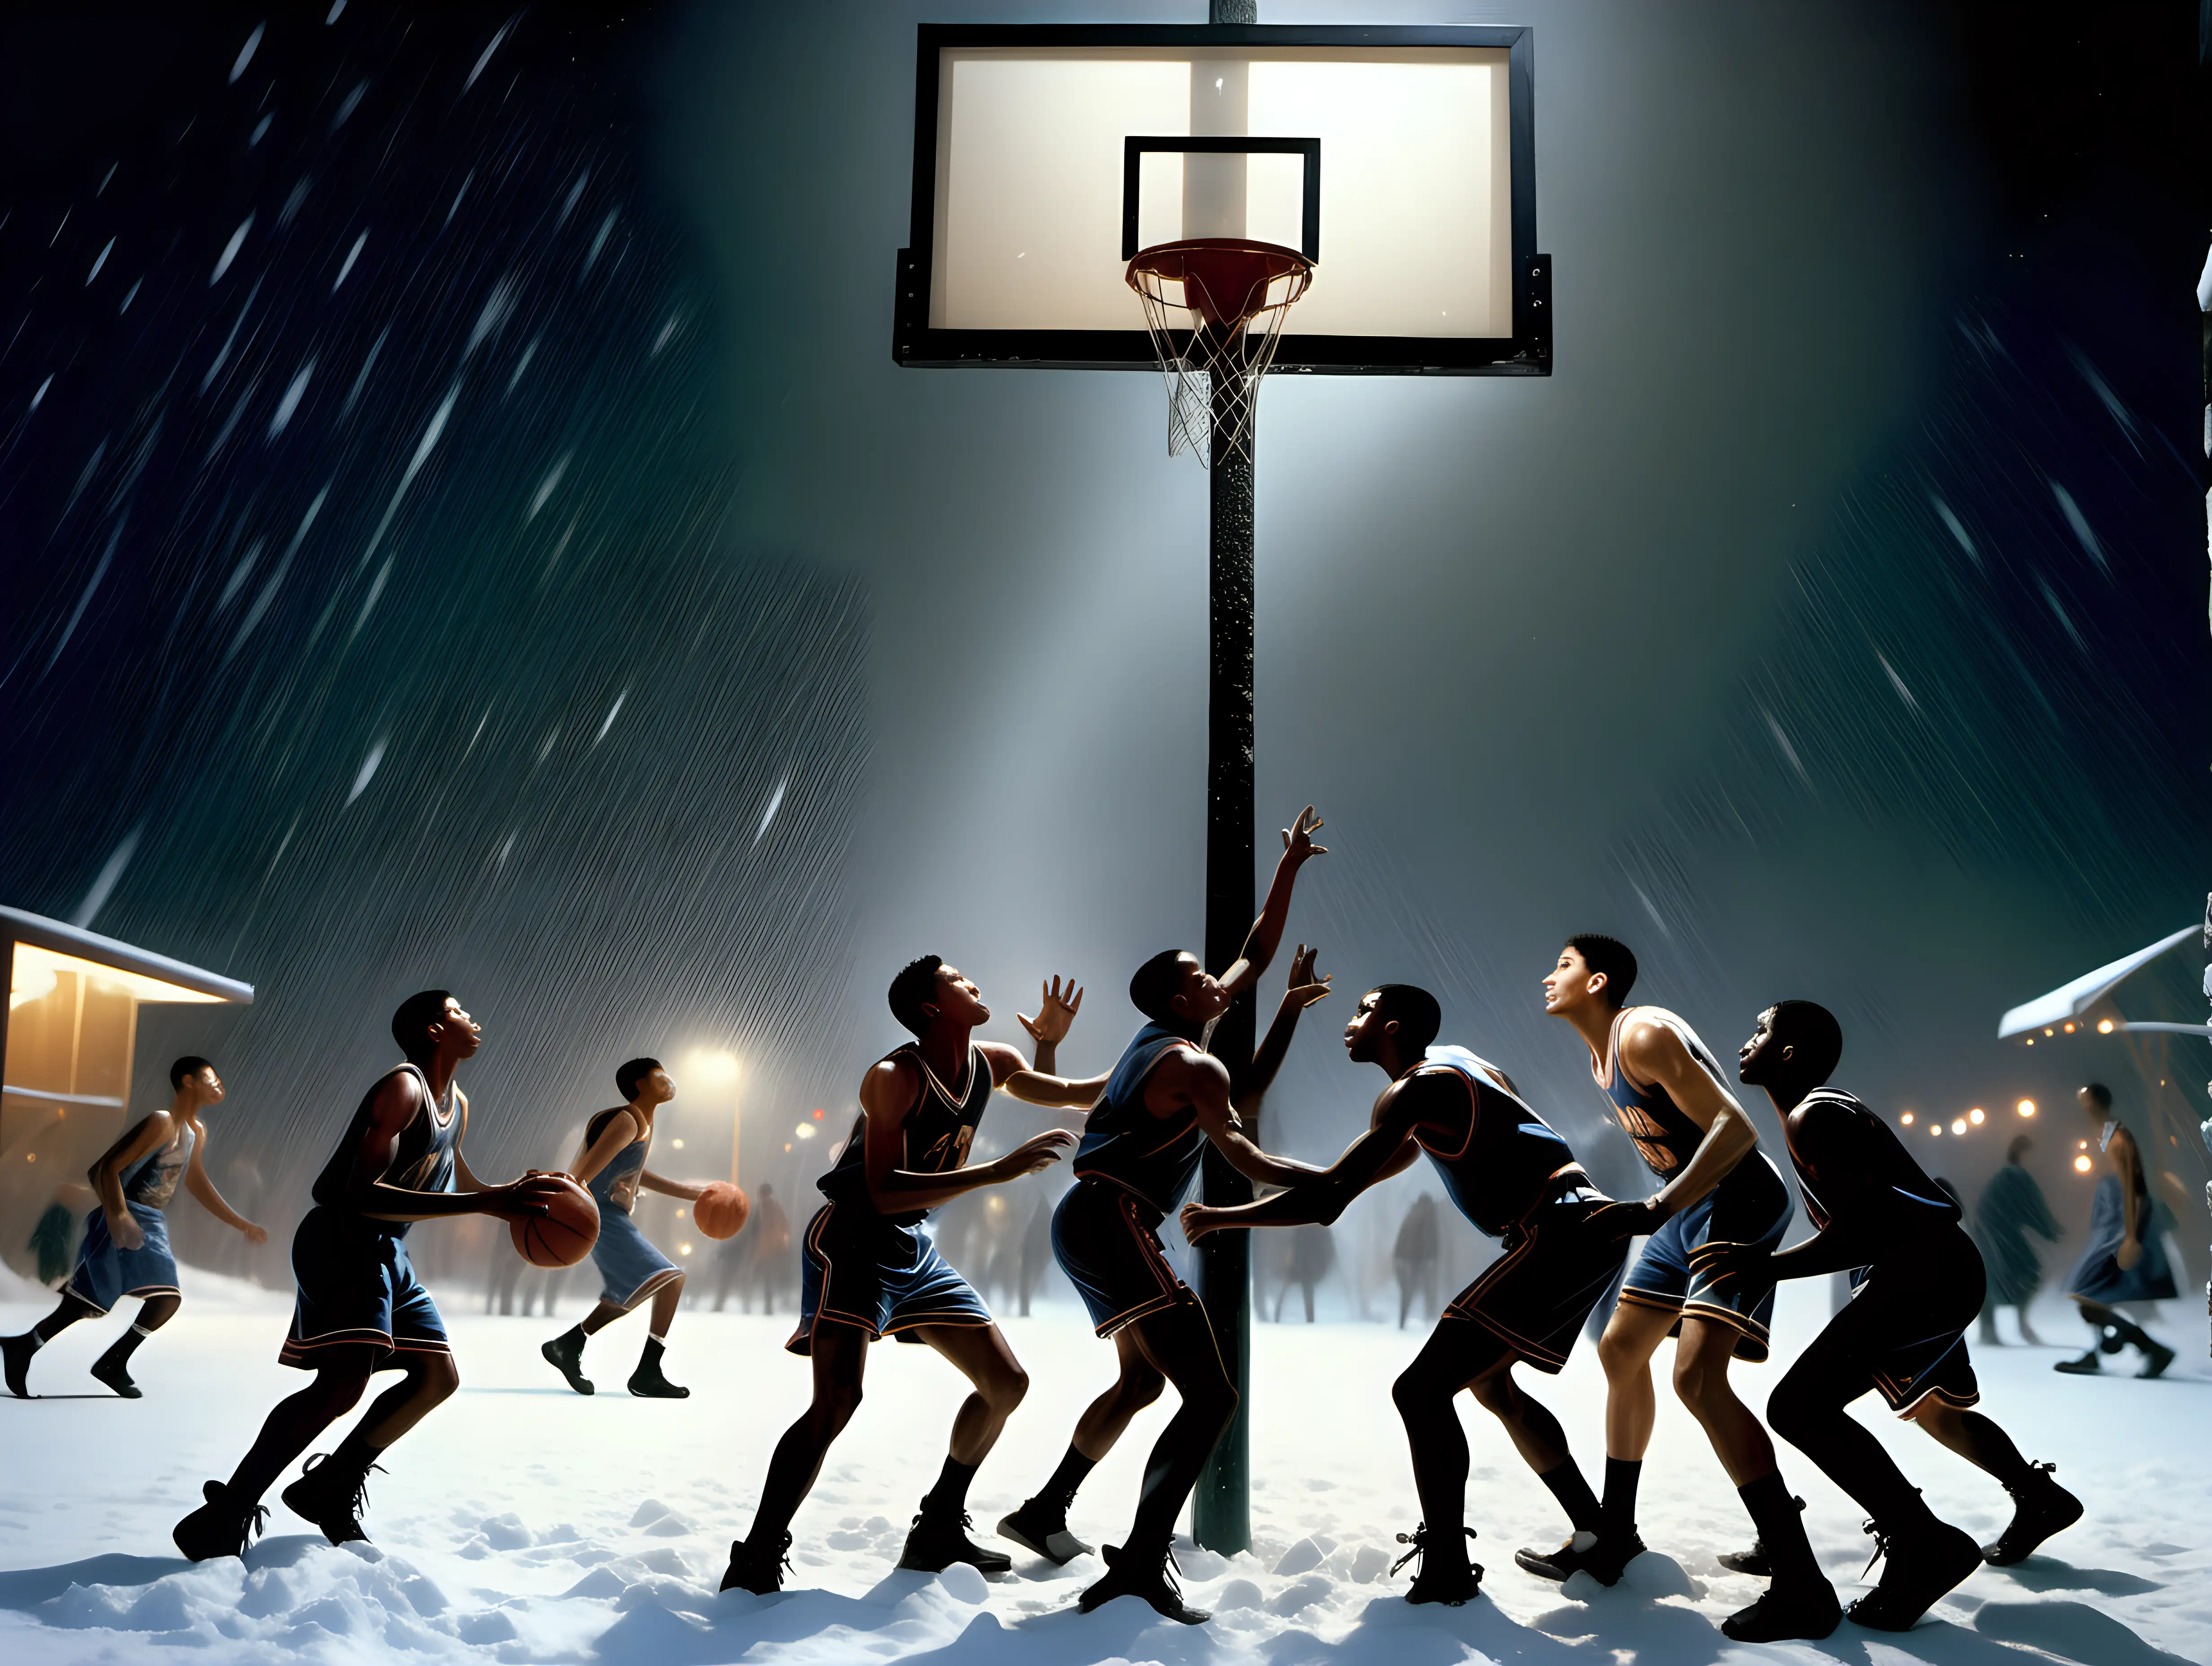 Basketball players at night at a NYC playground in a snow storm by frank frazetta and annie leibovitz, photograph, tilted frame and close up